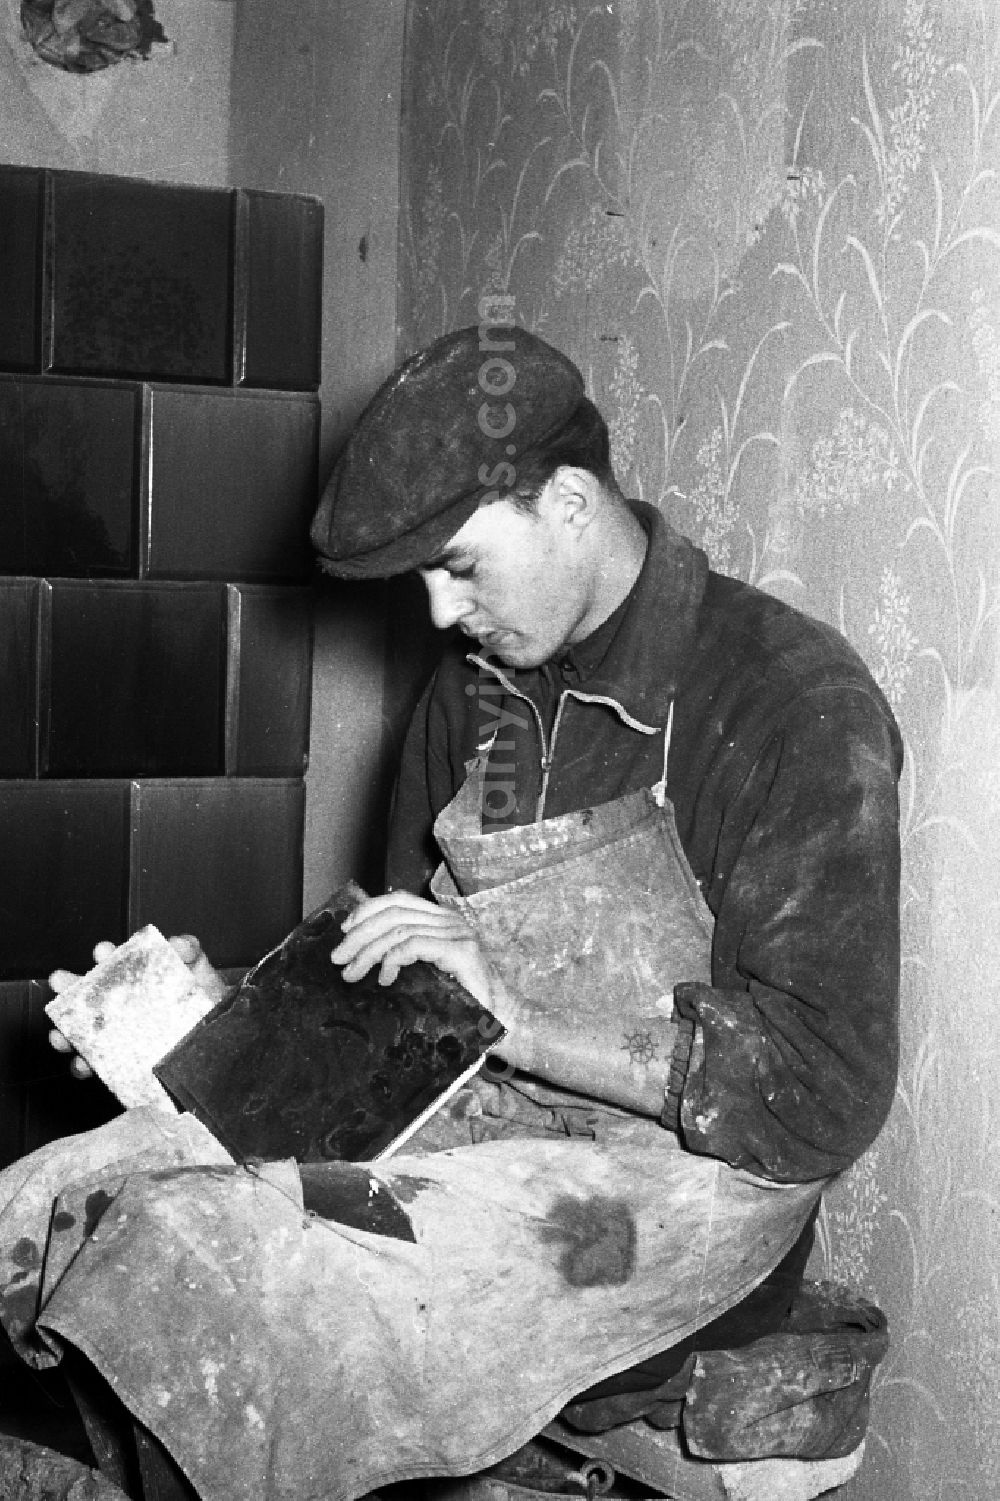 Zschopau: A stove farmer stove fitter puts a tiled stove in a flat in Zschopau in the federal state Saxony in the area of the former GDR, German democratic republic